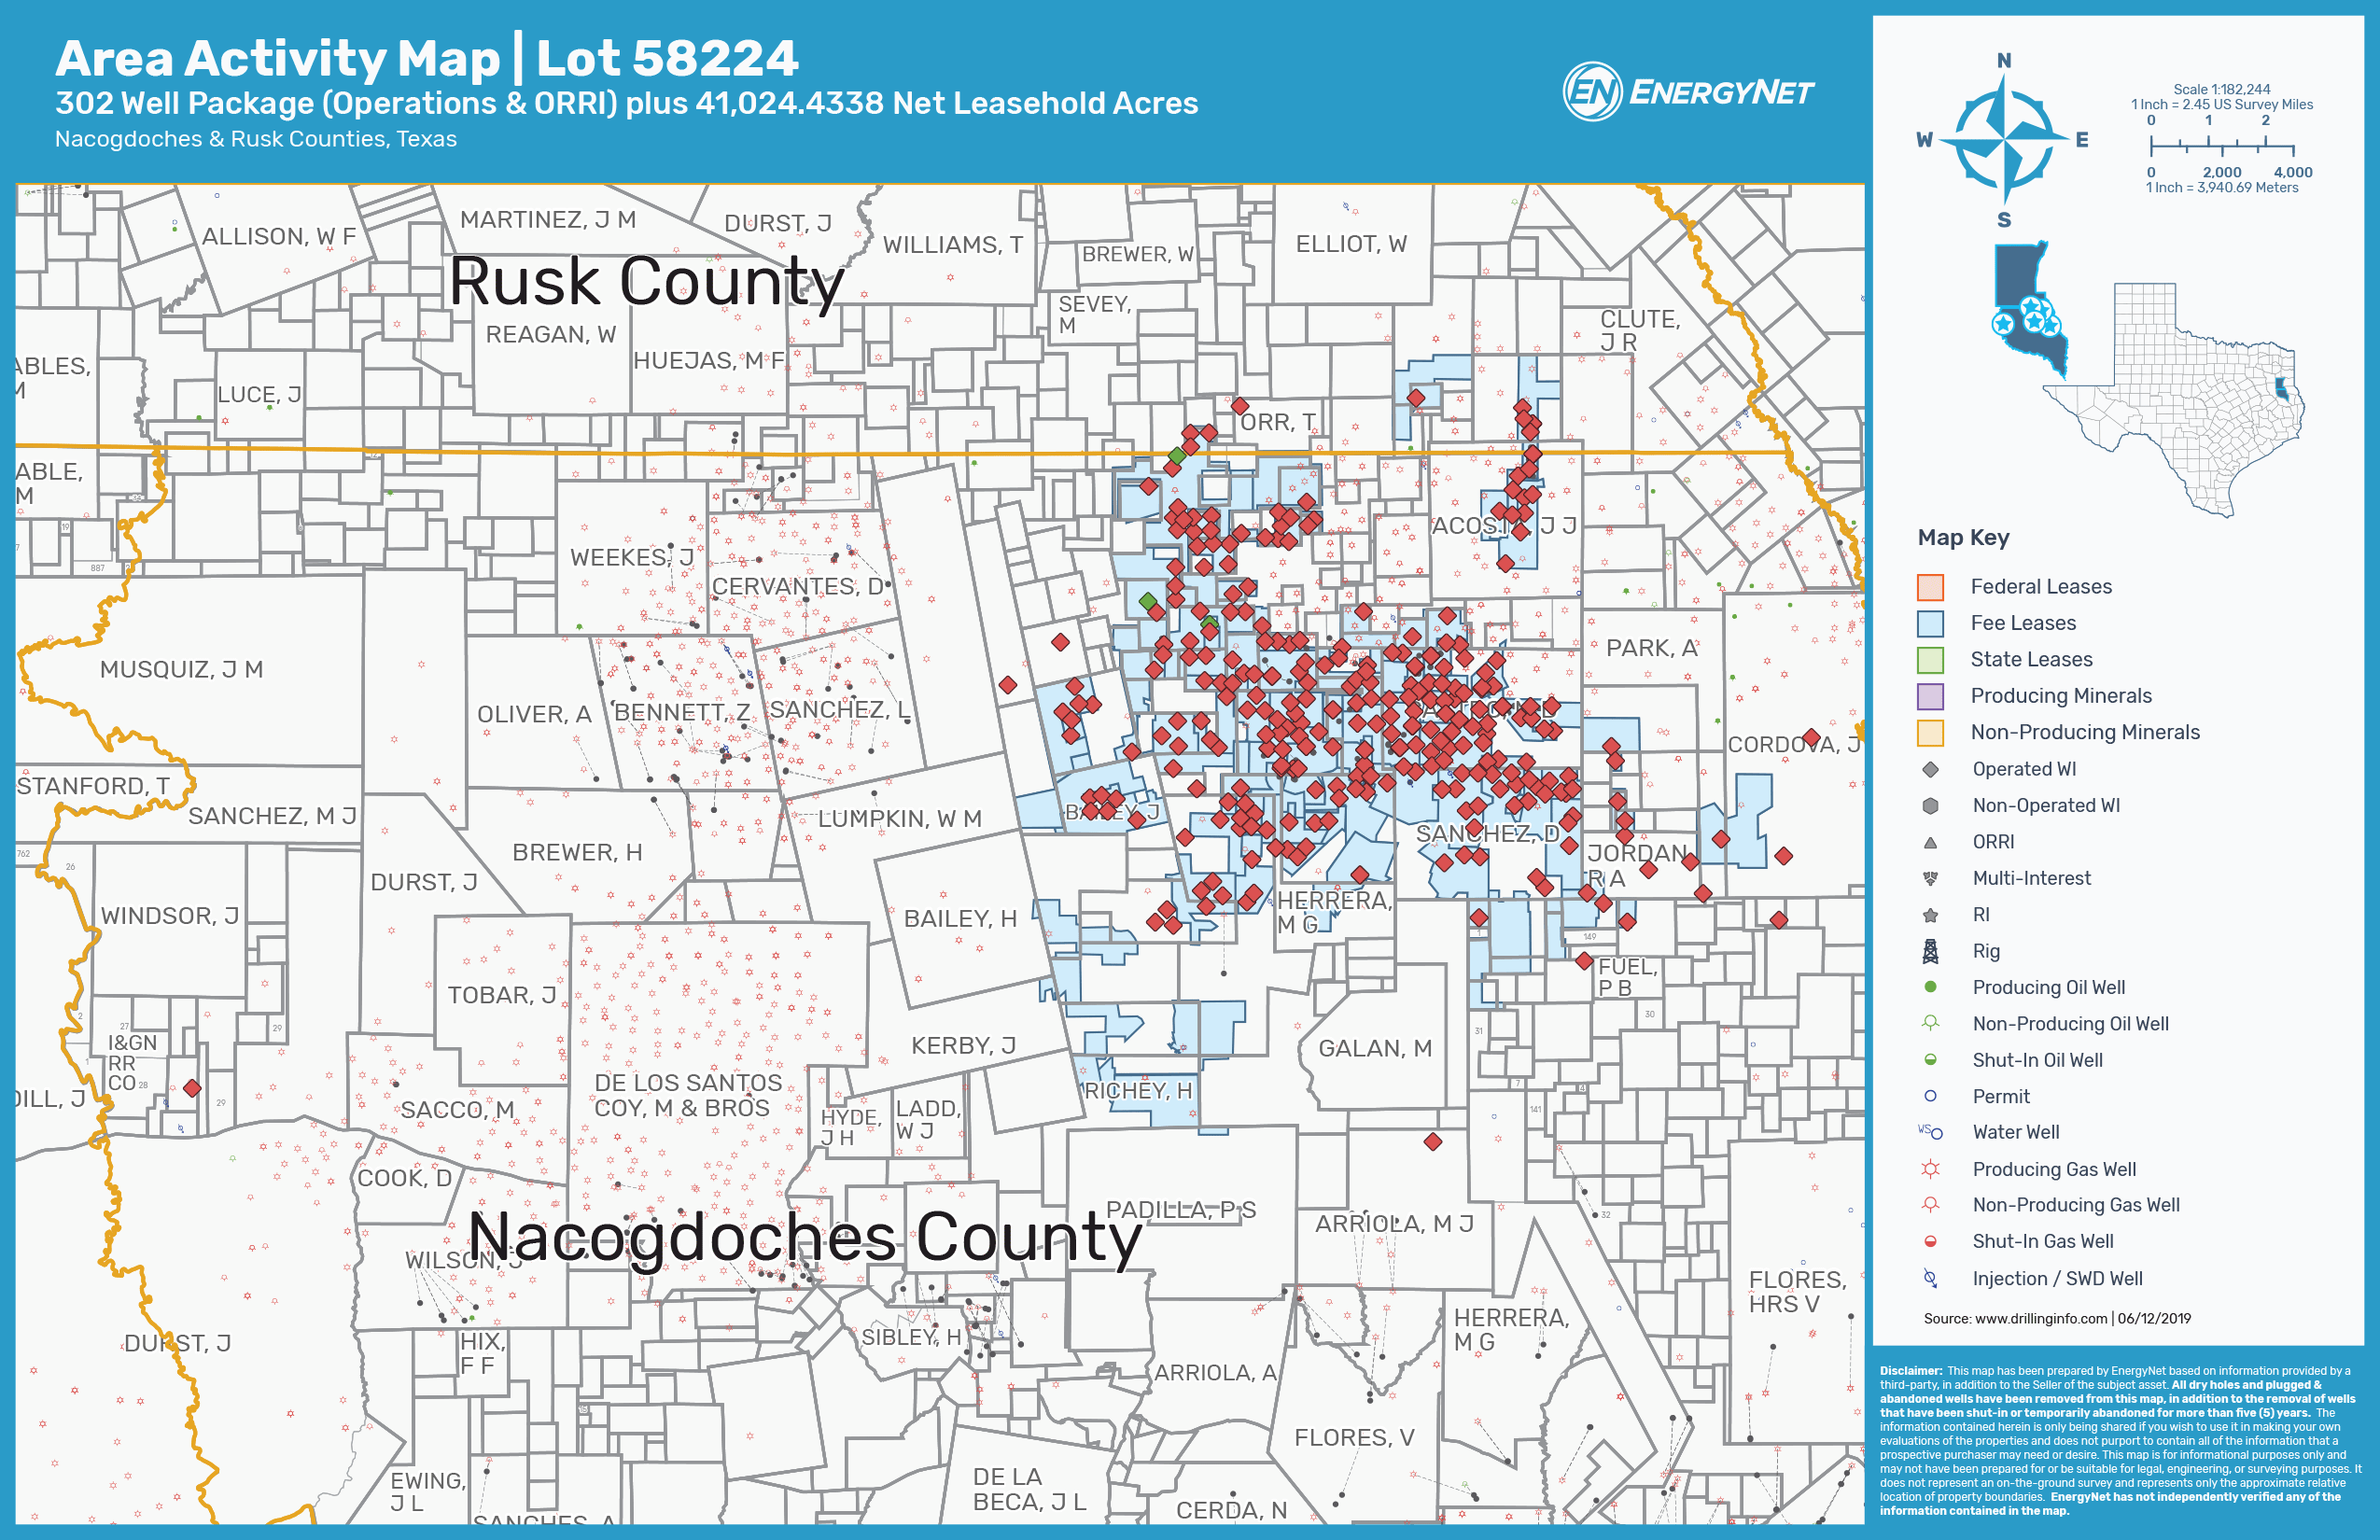 Weatherly Oil & Gas Operated East Texas Asset Map (Source: EnergyNet)